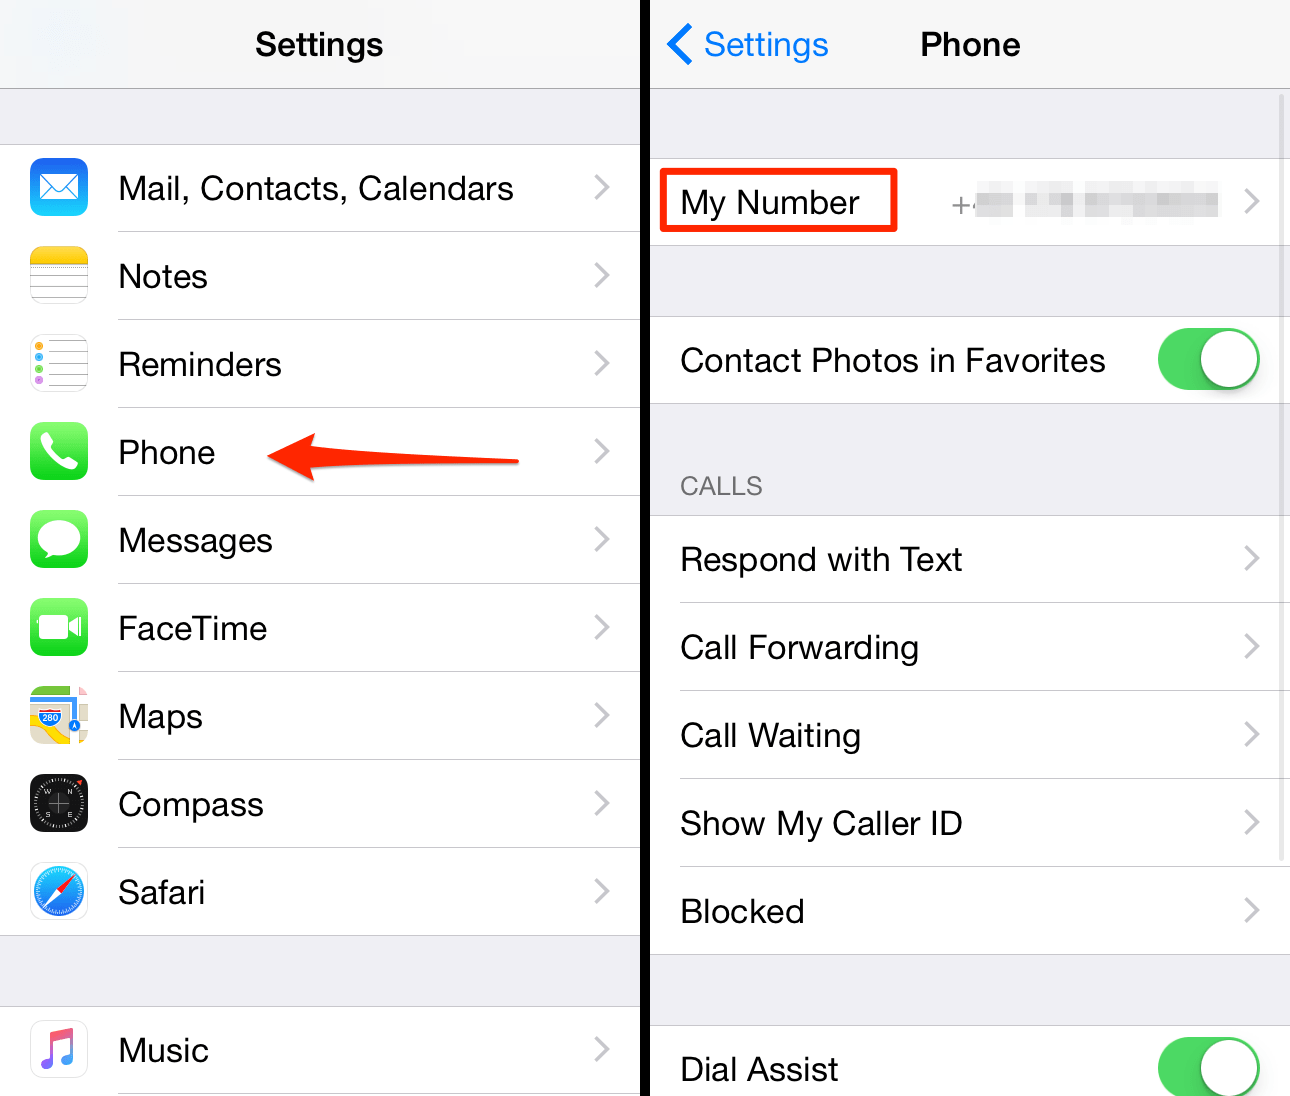 How to Find My Number on iPhone